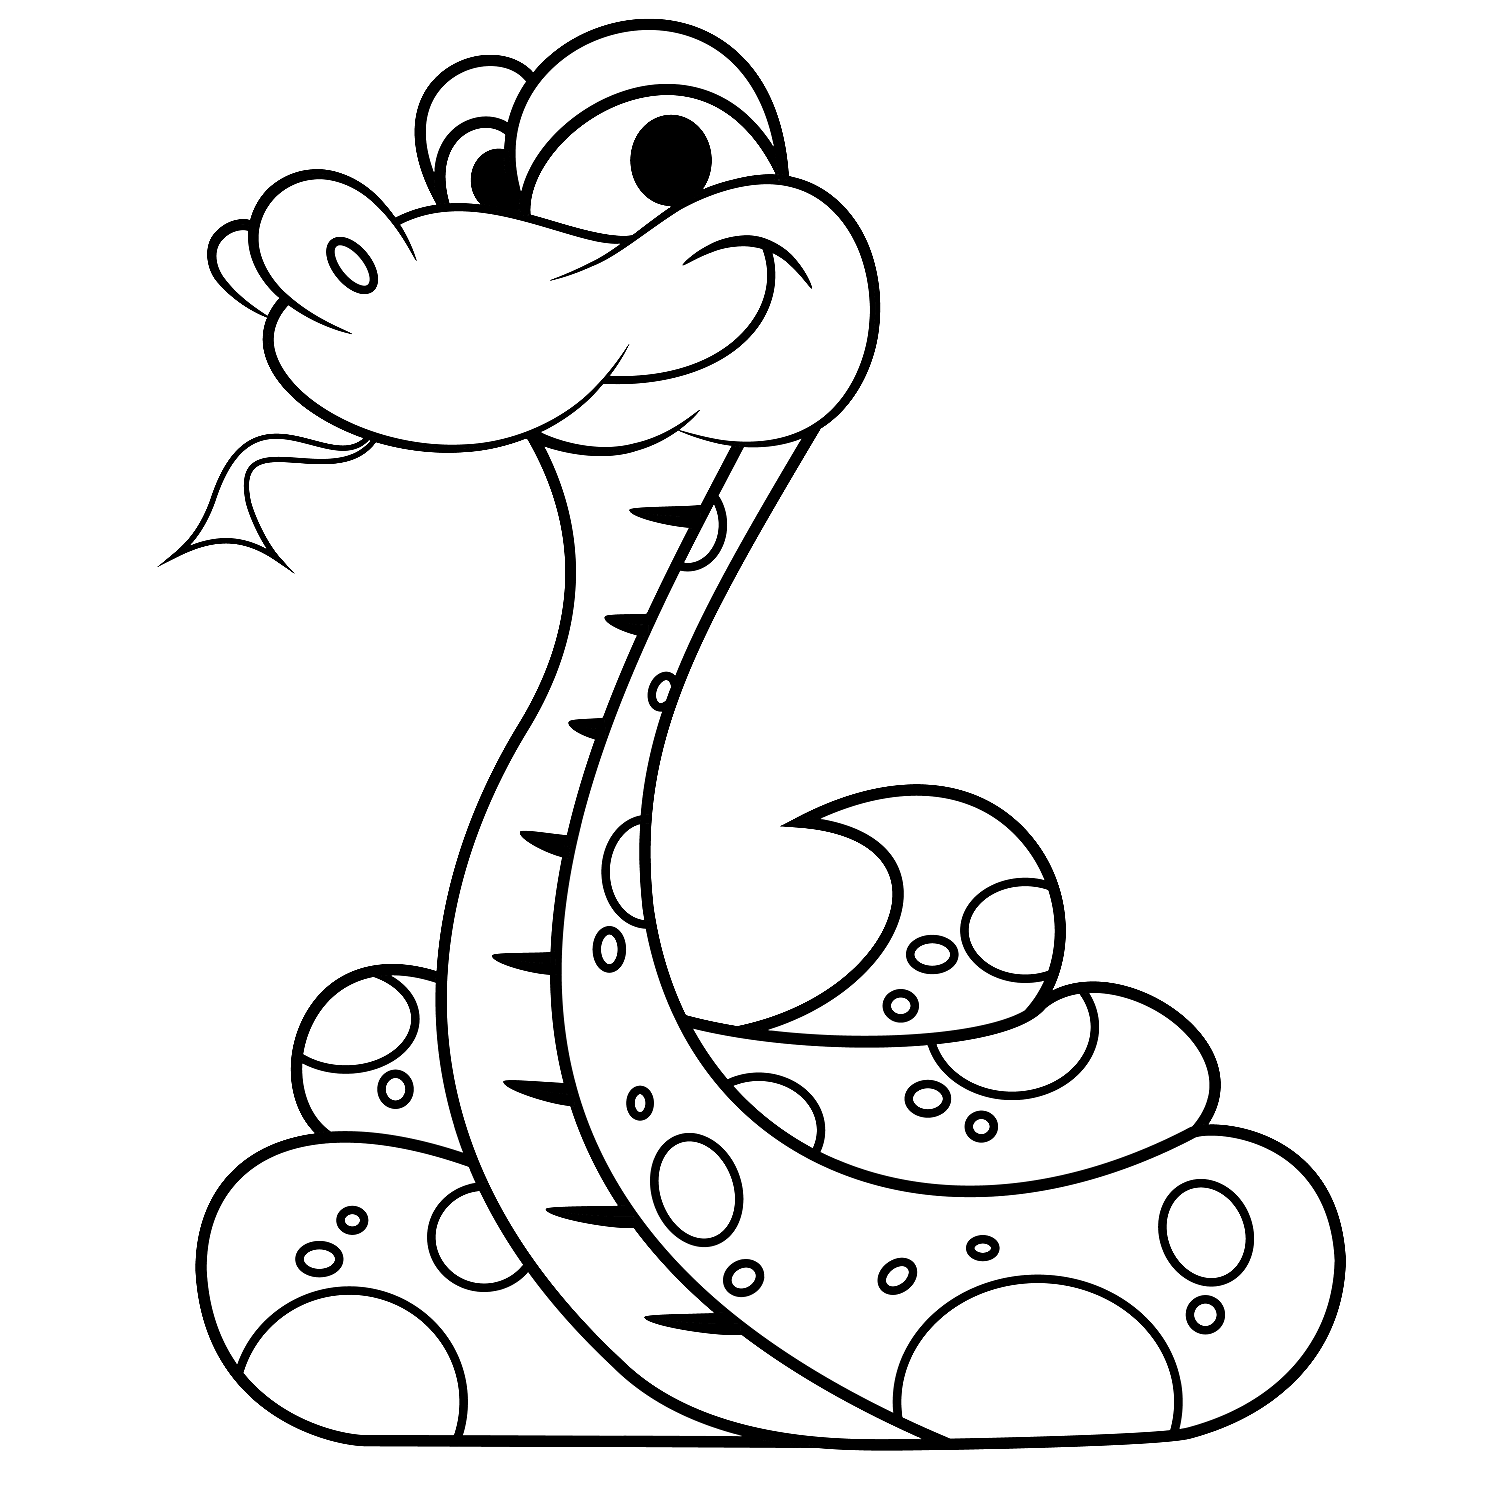 snake colouring pages snake coloring pages free for children colouring snake pages 